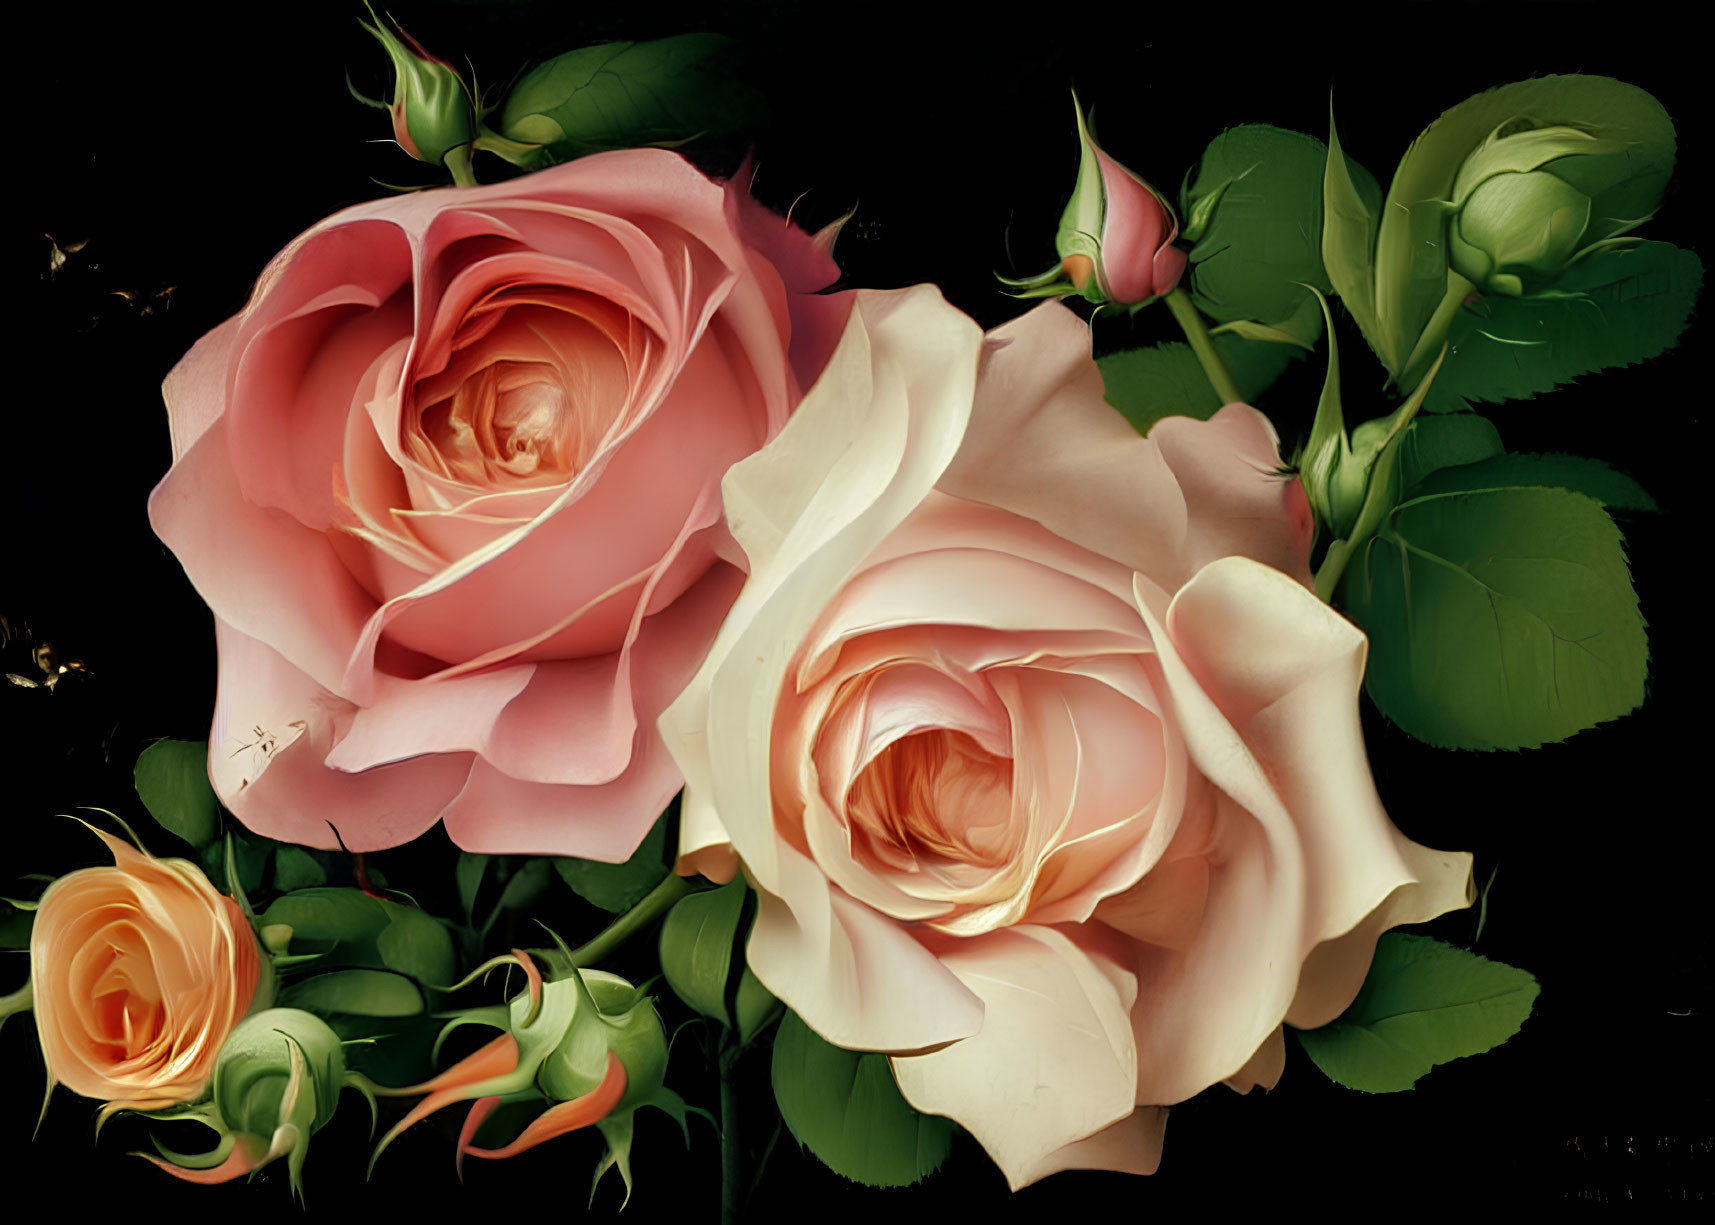 Detailed painting of roses in various stages of bloom with green leaves